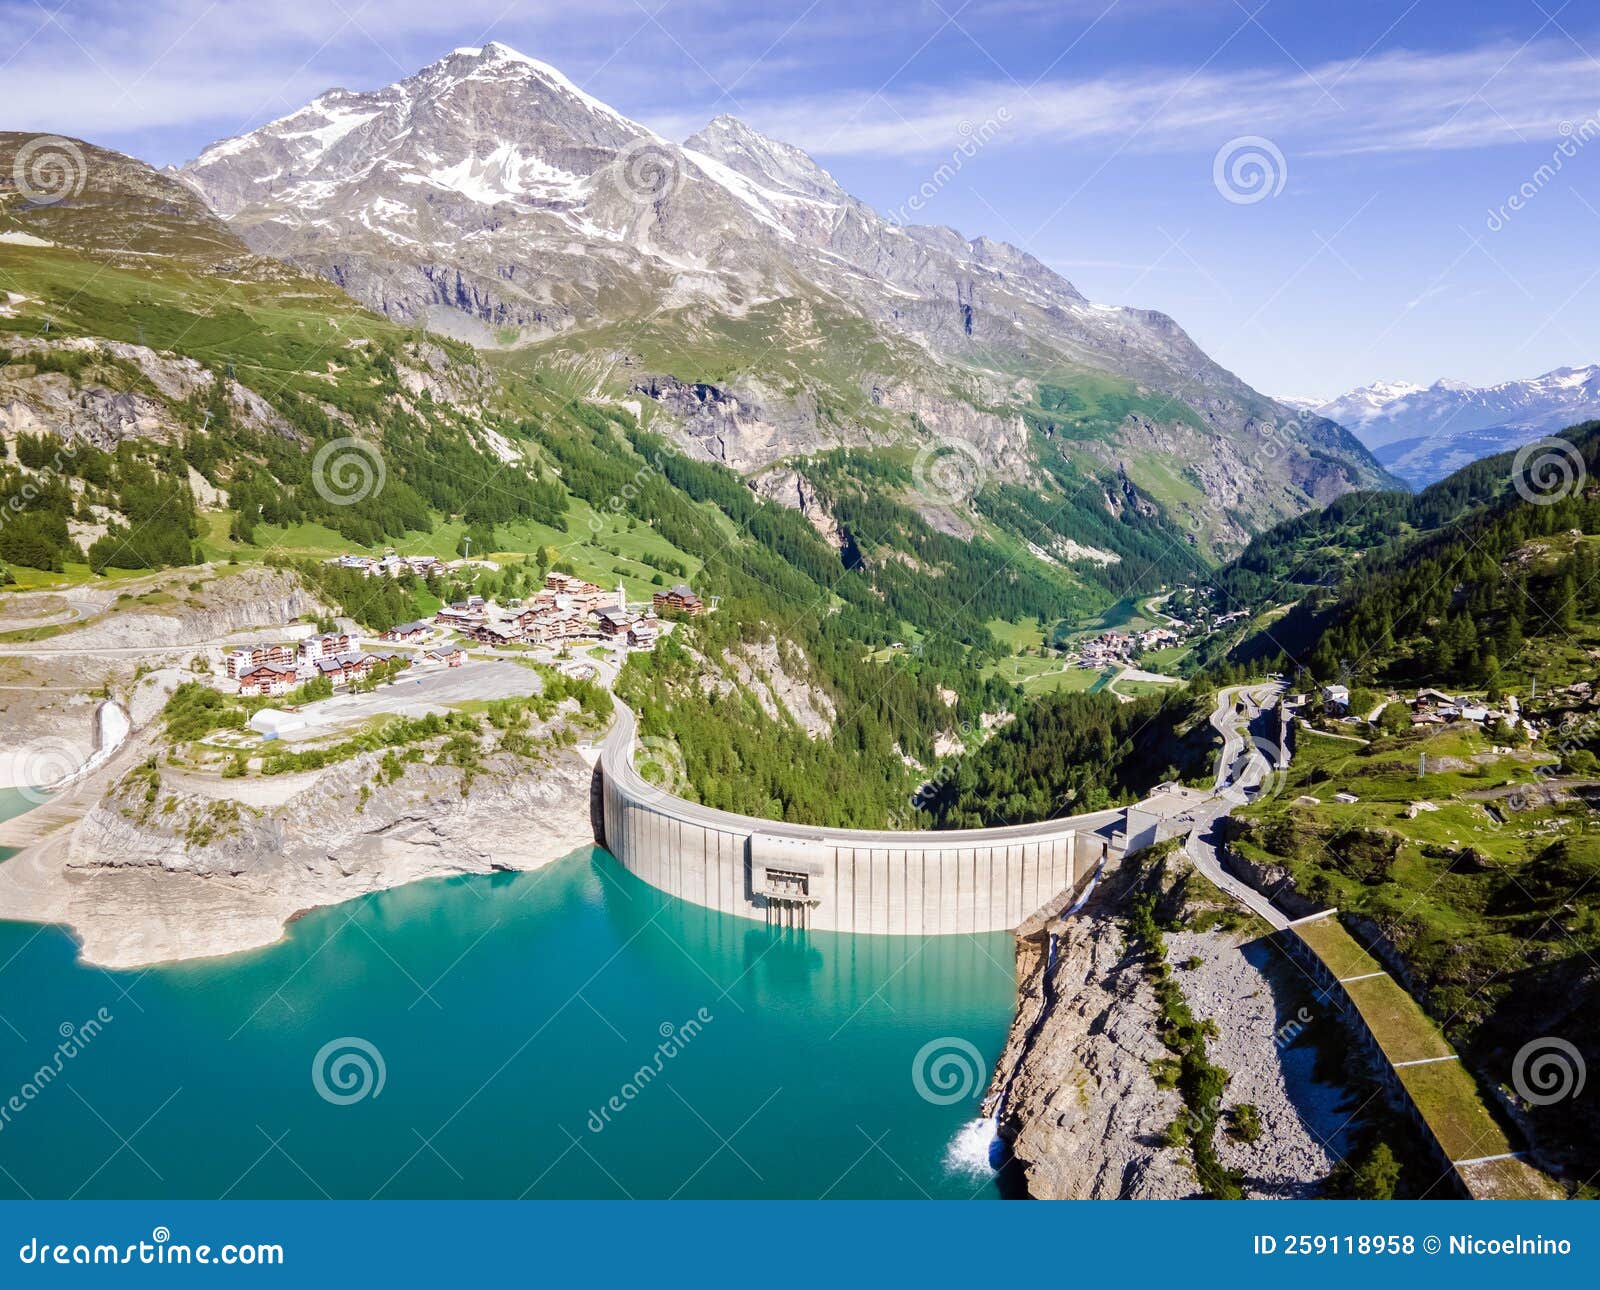 water dam and reservoir lake aerial view in alps mountains generating hydroelectricity. low co2 footprint, decarbonize, renewable